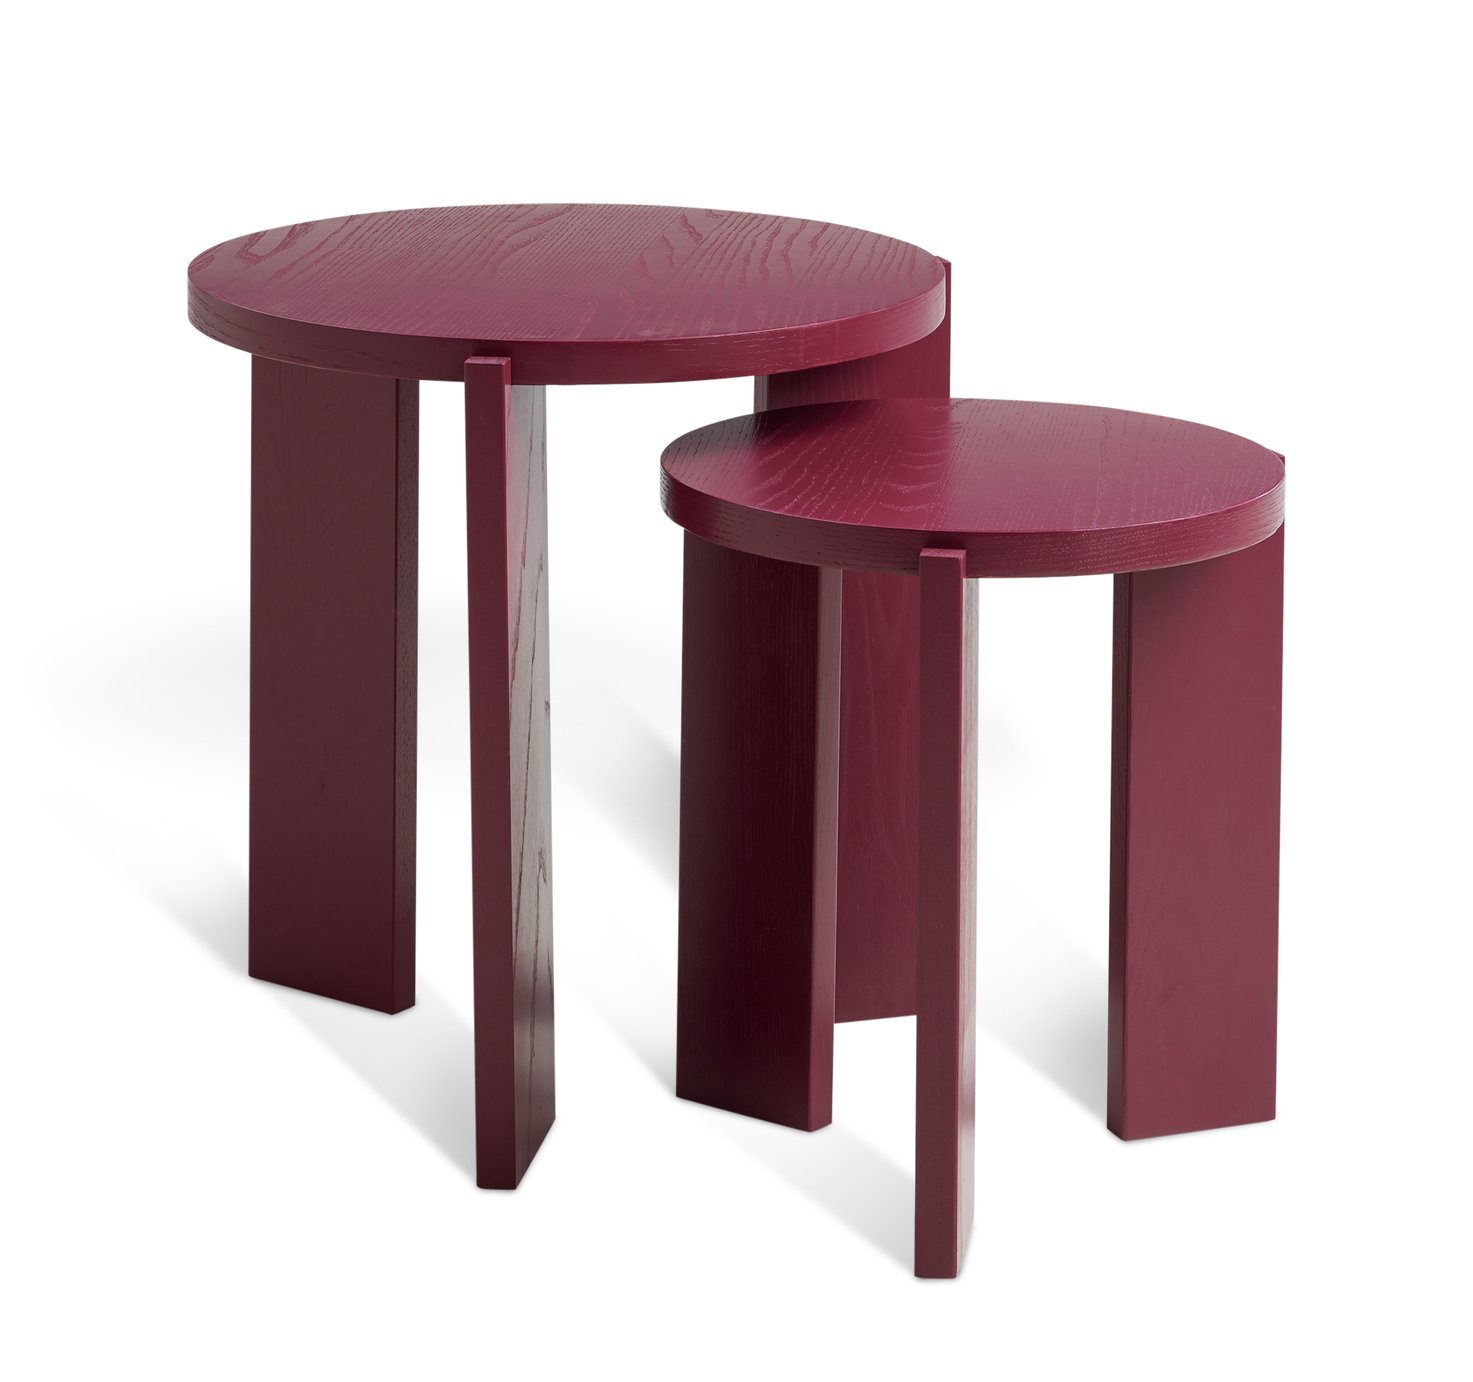 Habitat Xylo Solid Wood Nest of 2 Tables - Cherry Red